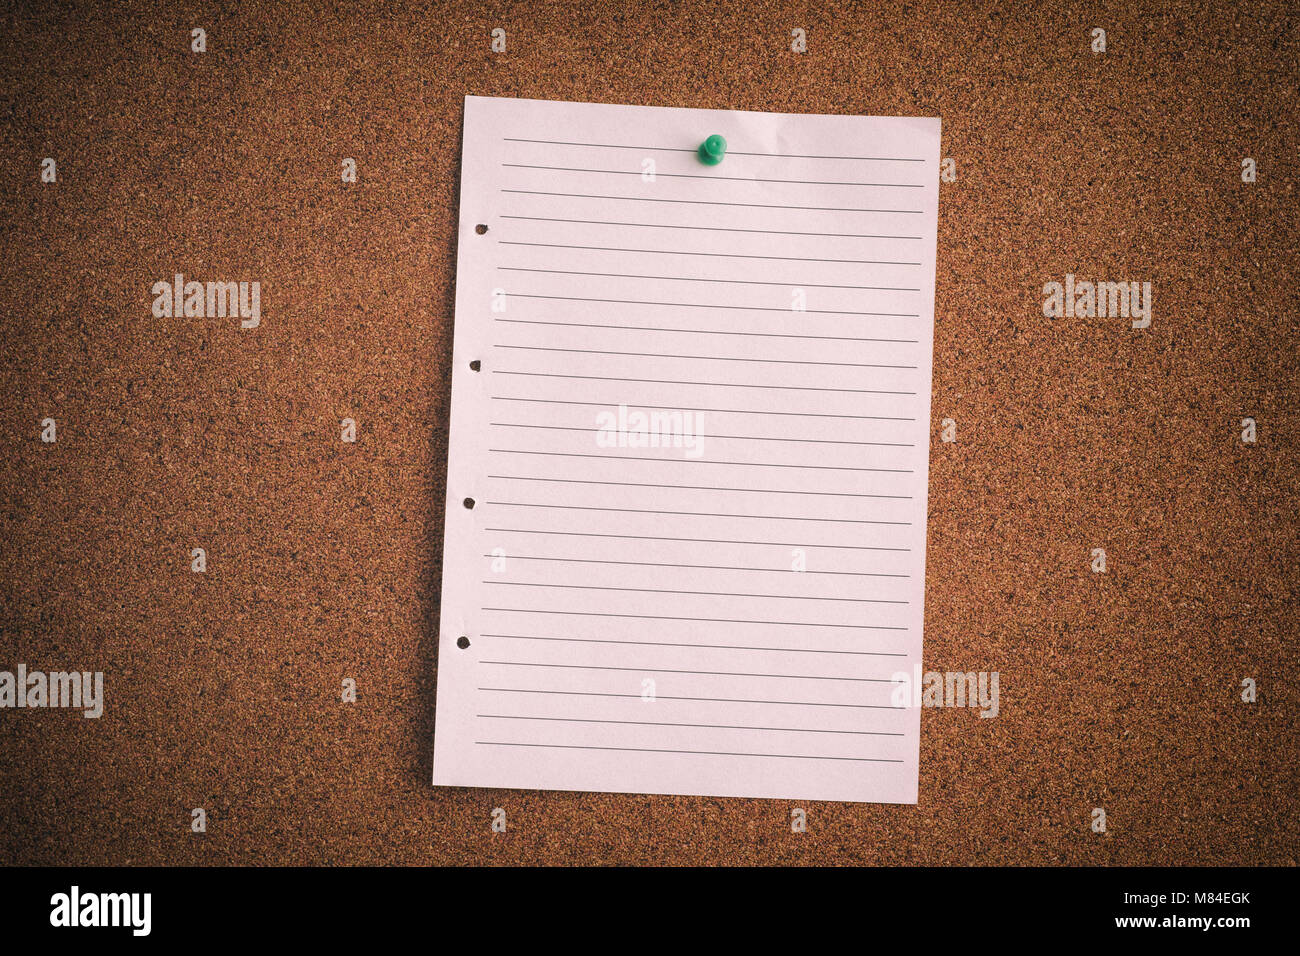 Blank lined paper sheet on bulletin board. Close up. Stock Photo